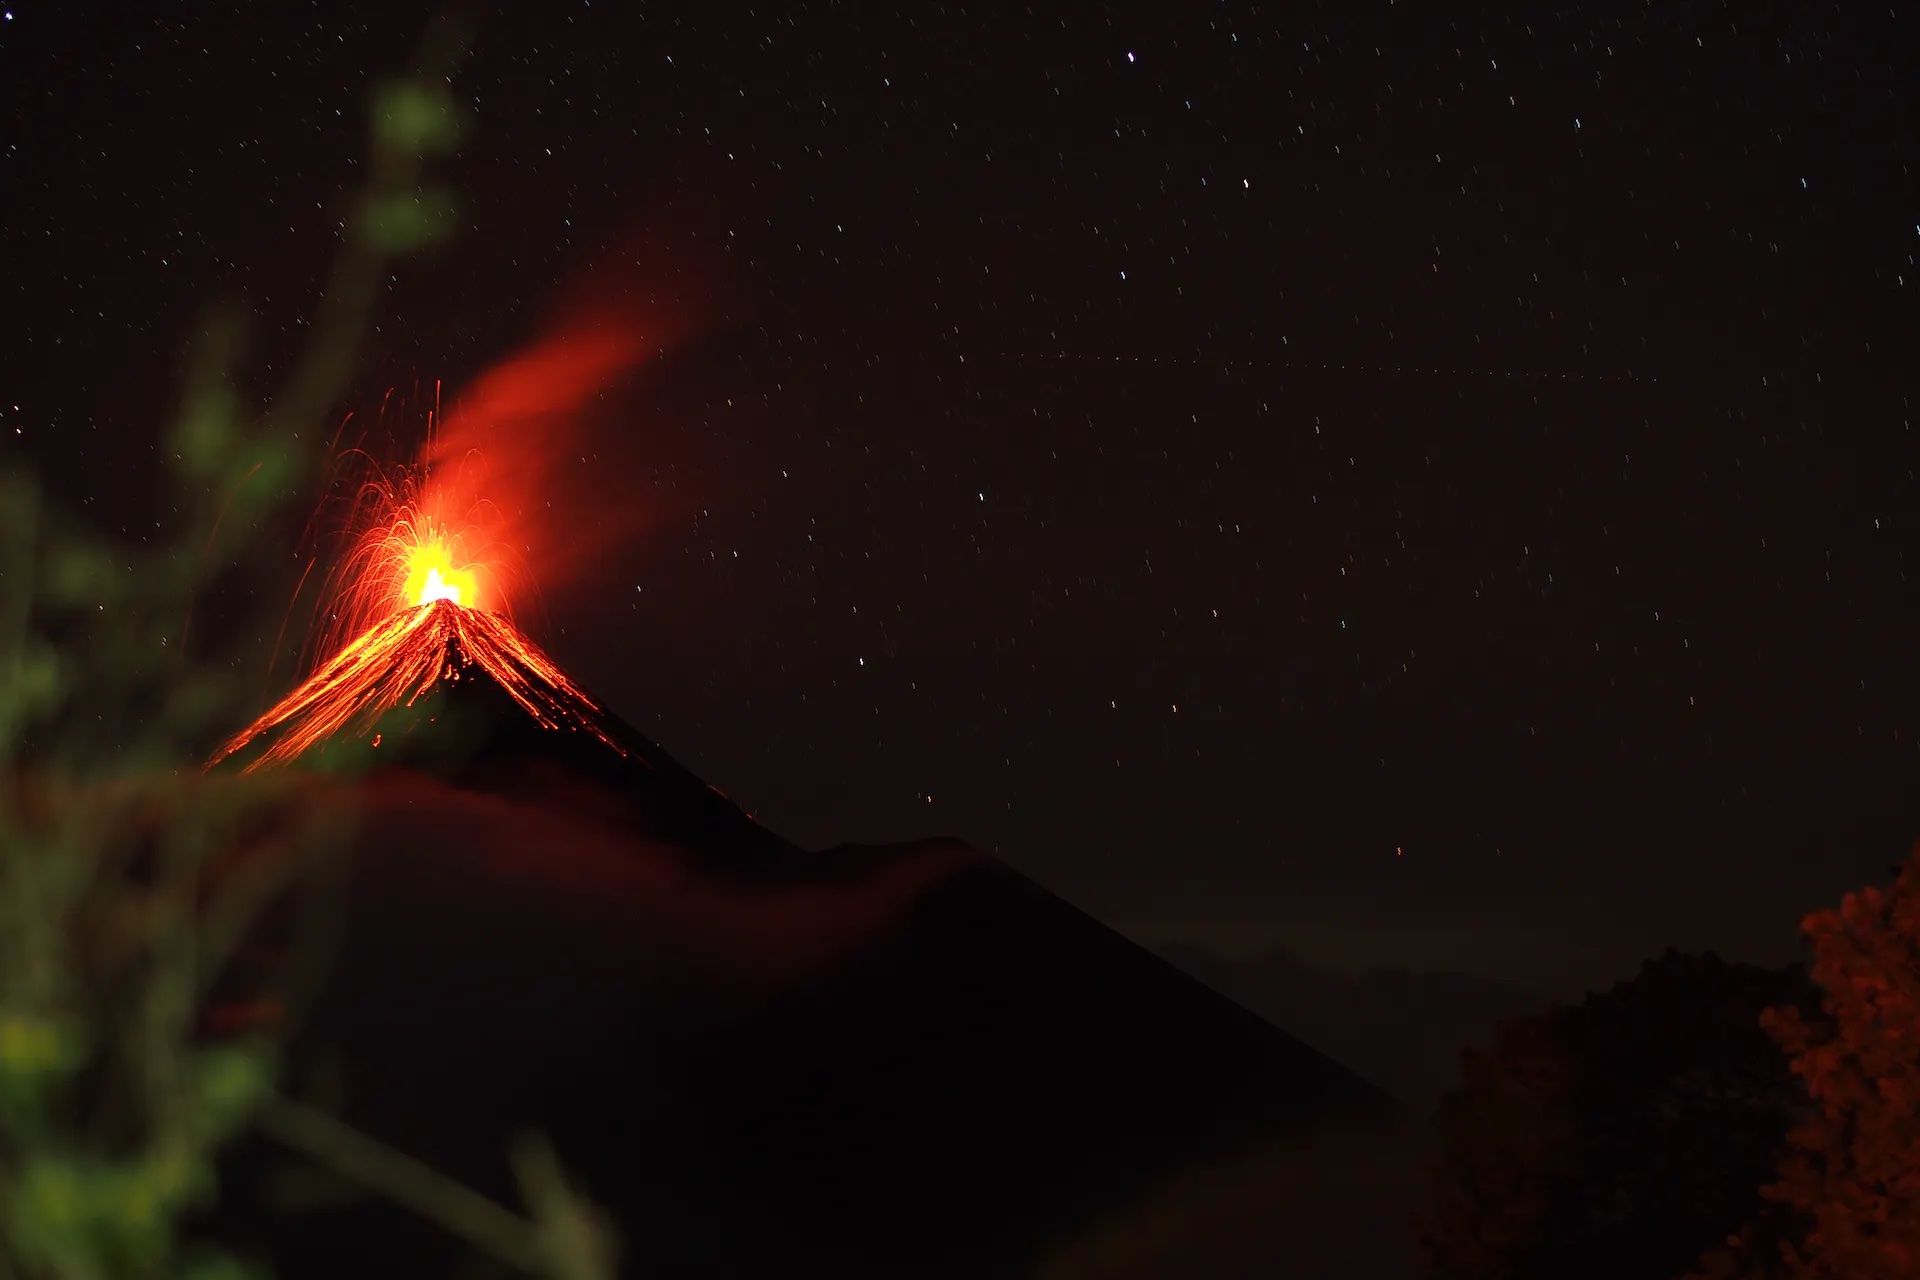 Night time eruption from El Fuego, an active volcano in Guatemala.